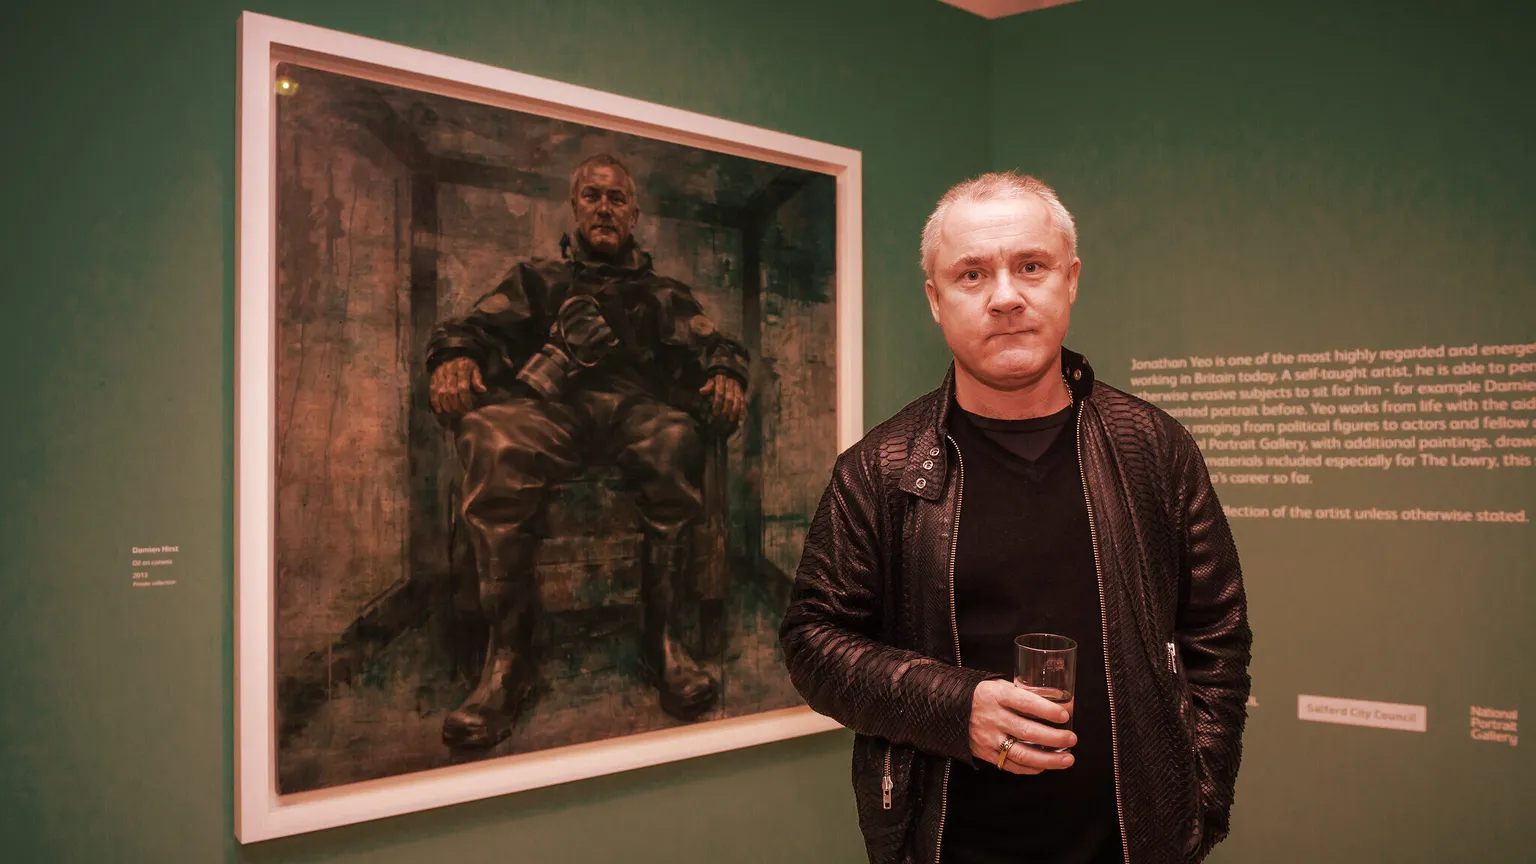 Damien Hirst. Image: The Lowry via Flickr (CC BY-NC-ND 2.0)